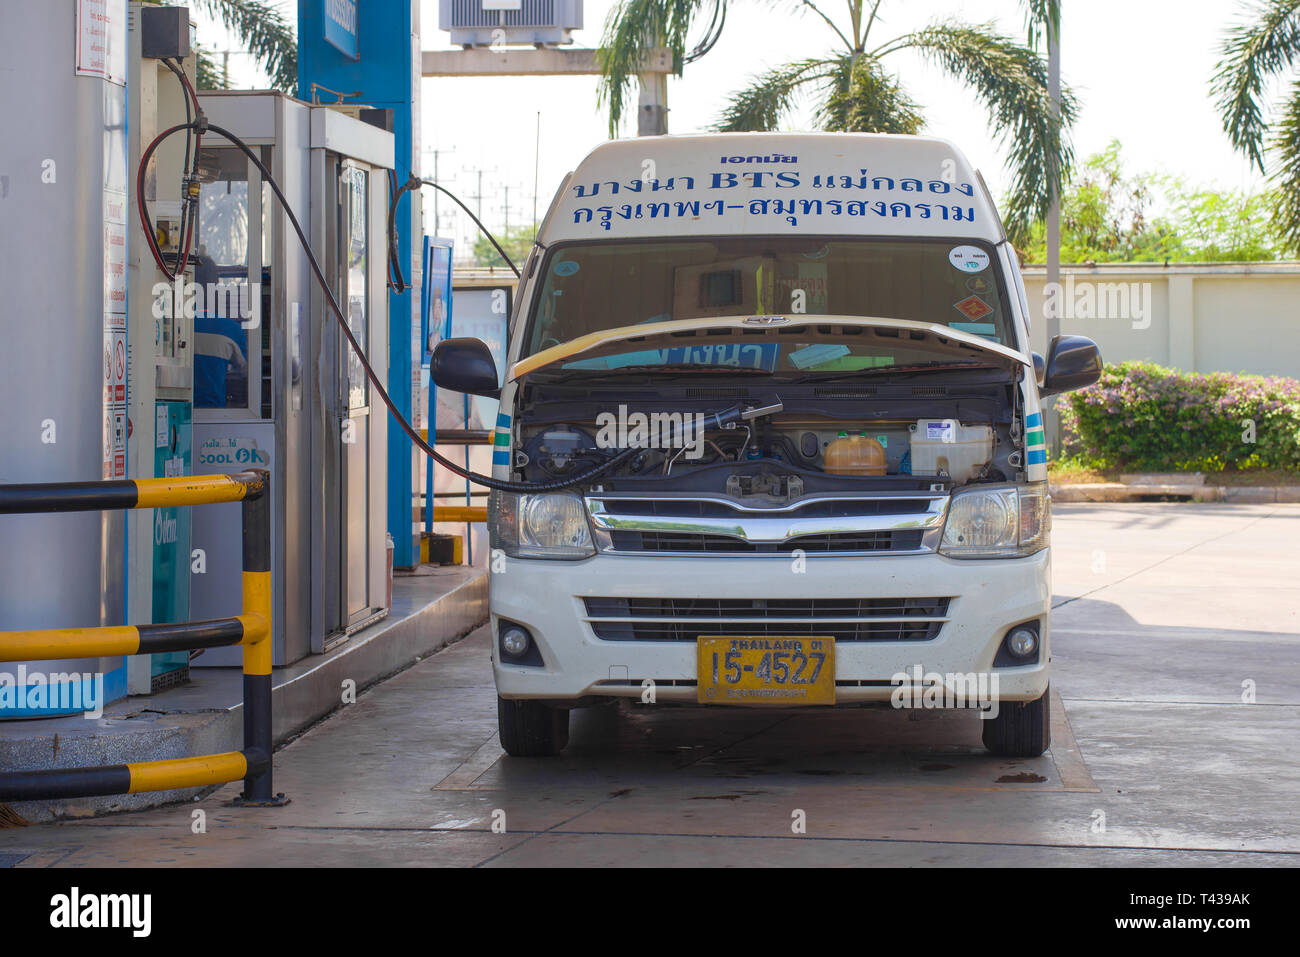 BANGKOK, THAILAND - DECEMBER 14, 2018: The Toyota minibus is filled with liquefied gas at a car fuel station Stock Photo